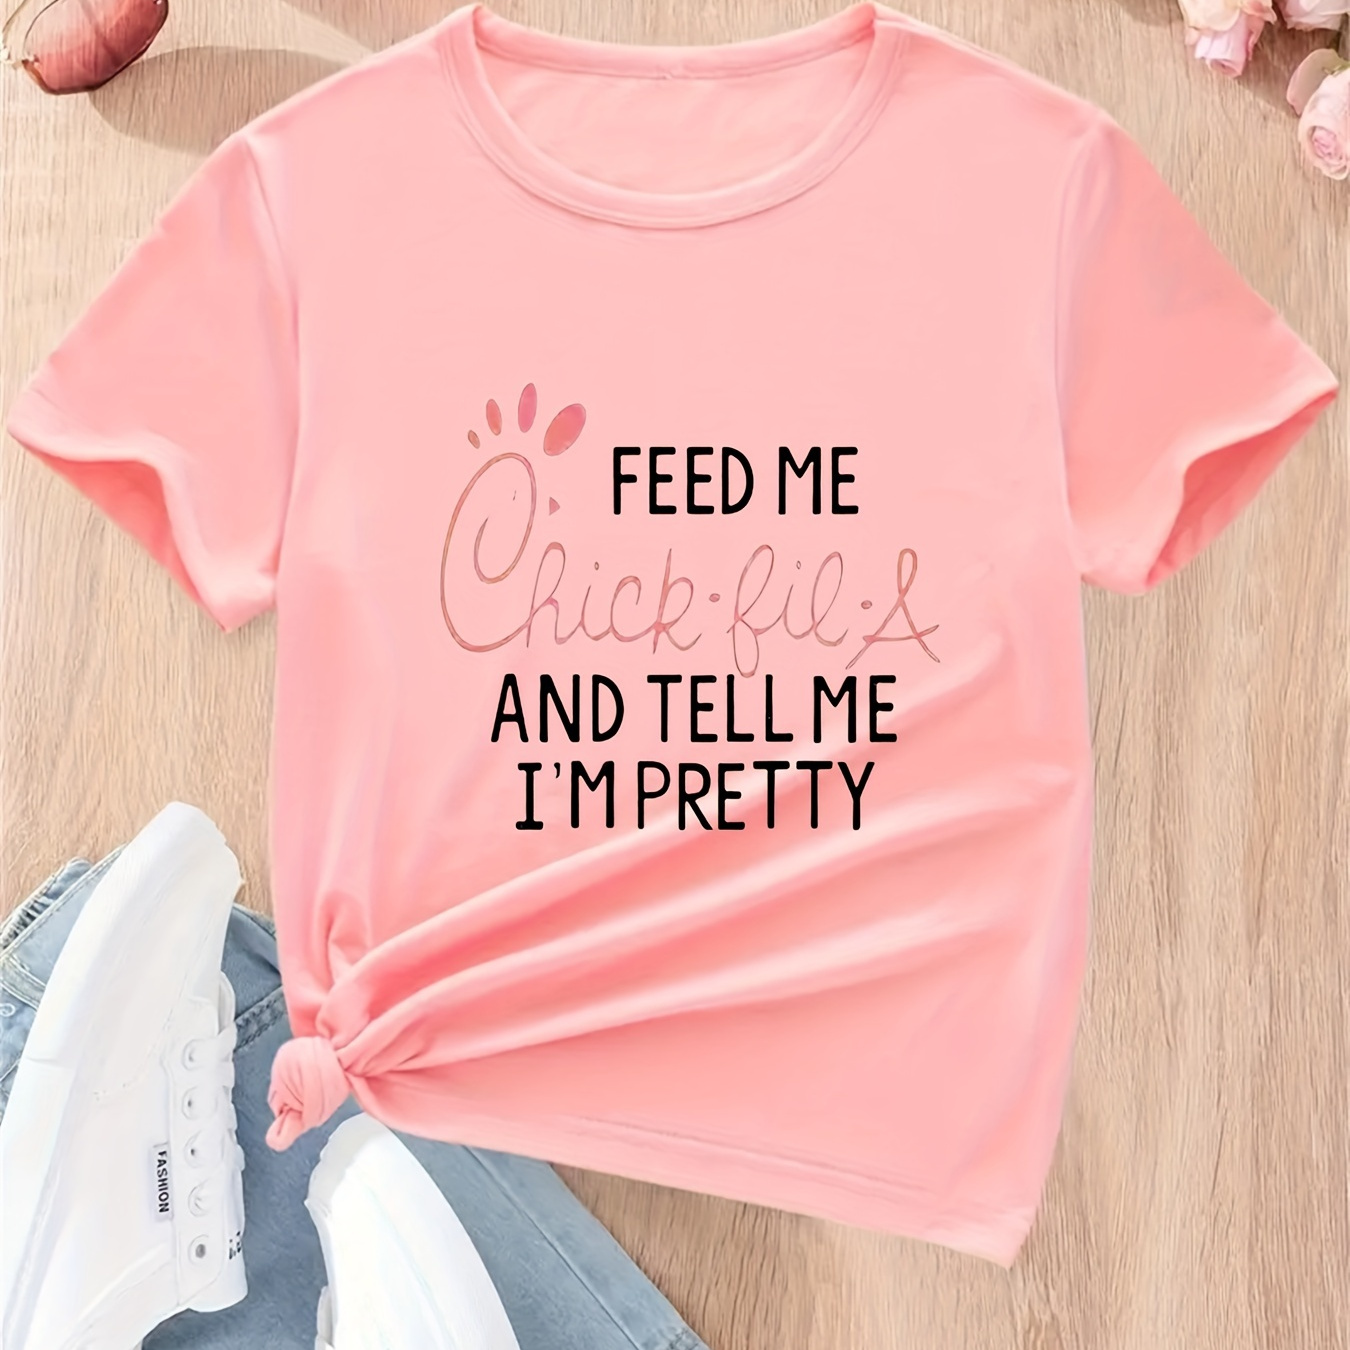 

Feed Me And Tell Me I'm Pretty Print, Girls' Casual Crew Neck Short Sleeve T-shirt, Comfy Top Clothes For Spring And Summer For Outdoor Activities